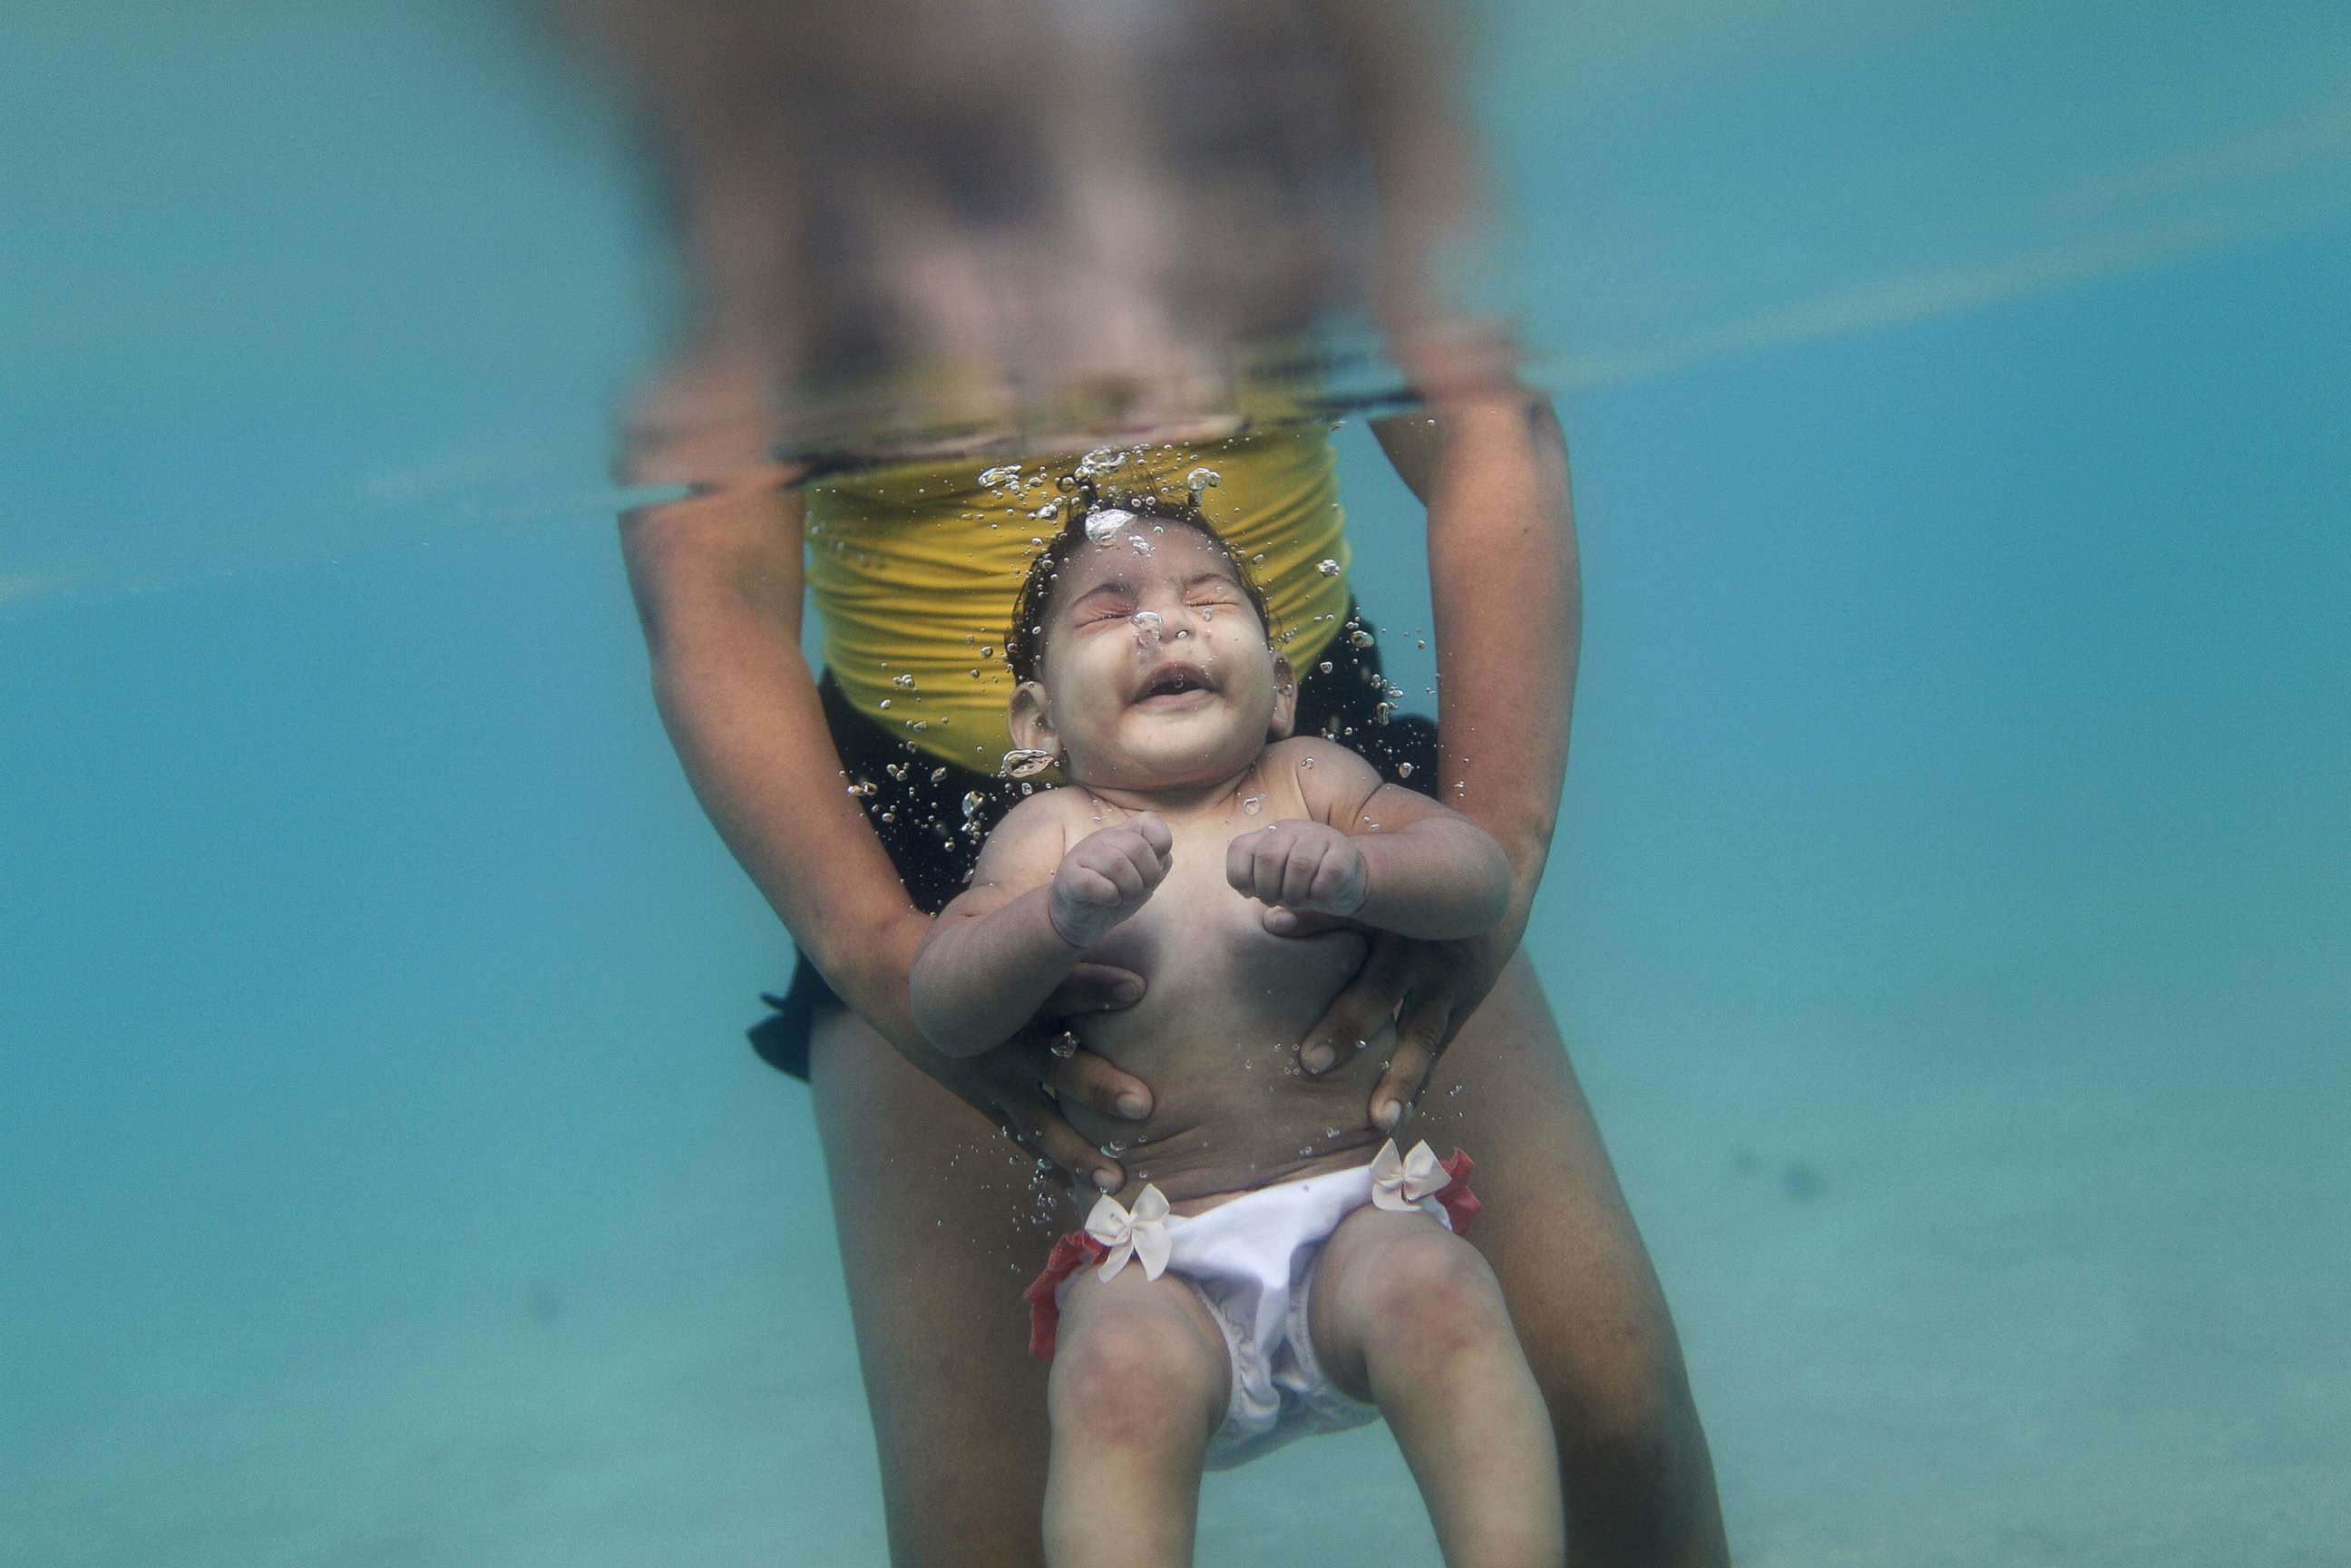 PHOTO: Rosana Vieira Alves and her five-month-old daughter Luana Vieira, who was born with microcephaly, pose for a picture in the sea of Porto de Galinhas, a beach located in Ipojuca, in the state of Pernambuco, Brazil, March 2, 2016.